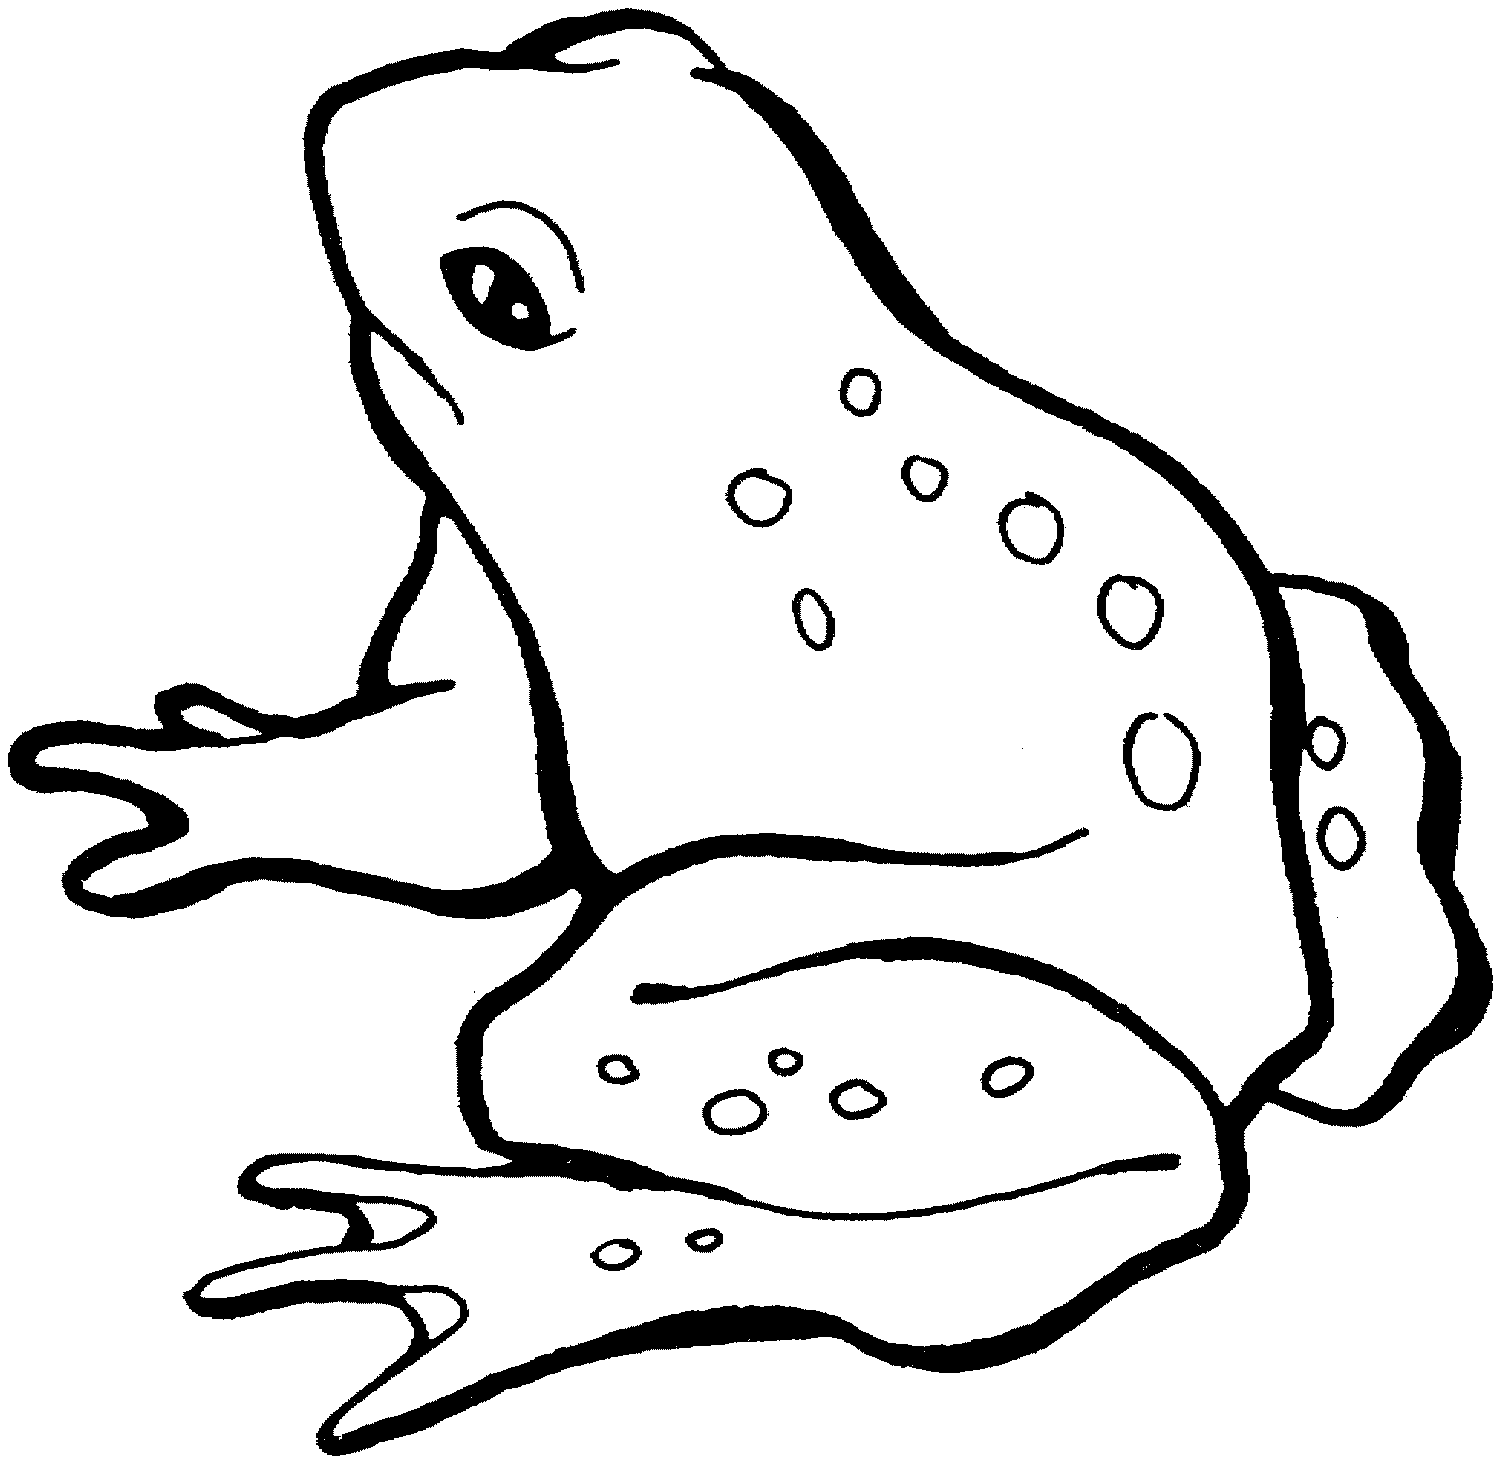 Toad clipart black and white